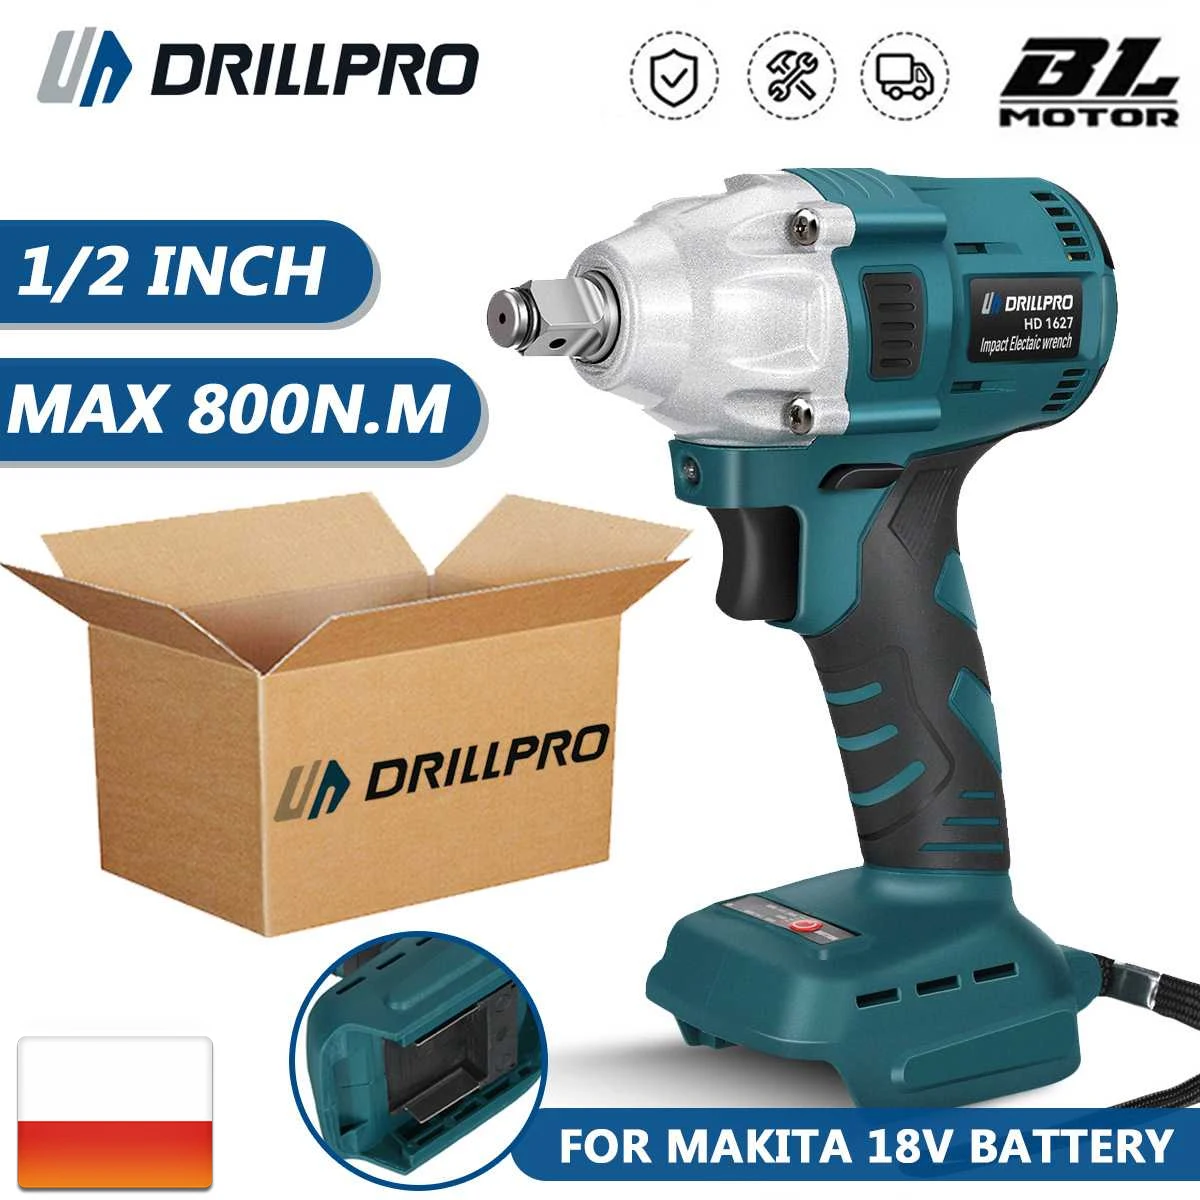 

Drillpro 800N.M Brushless Impact Electric Wrench 2700RPM Cordless 1/2 inch For Makita 18V Battery klucz udarowy akumulatorowy